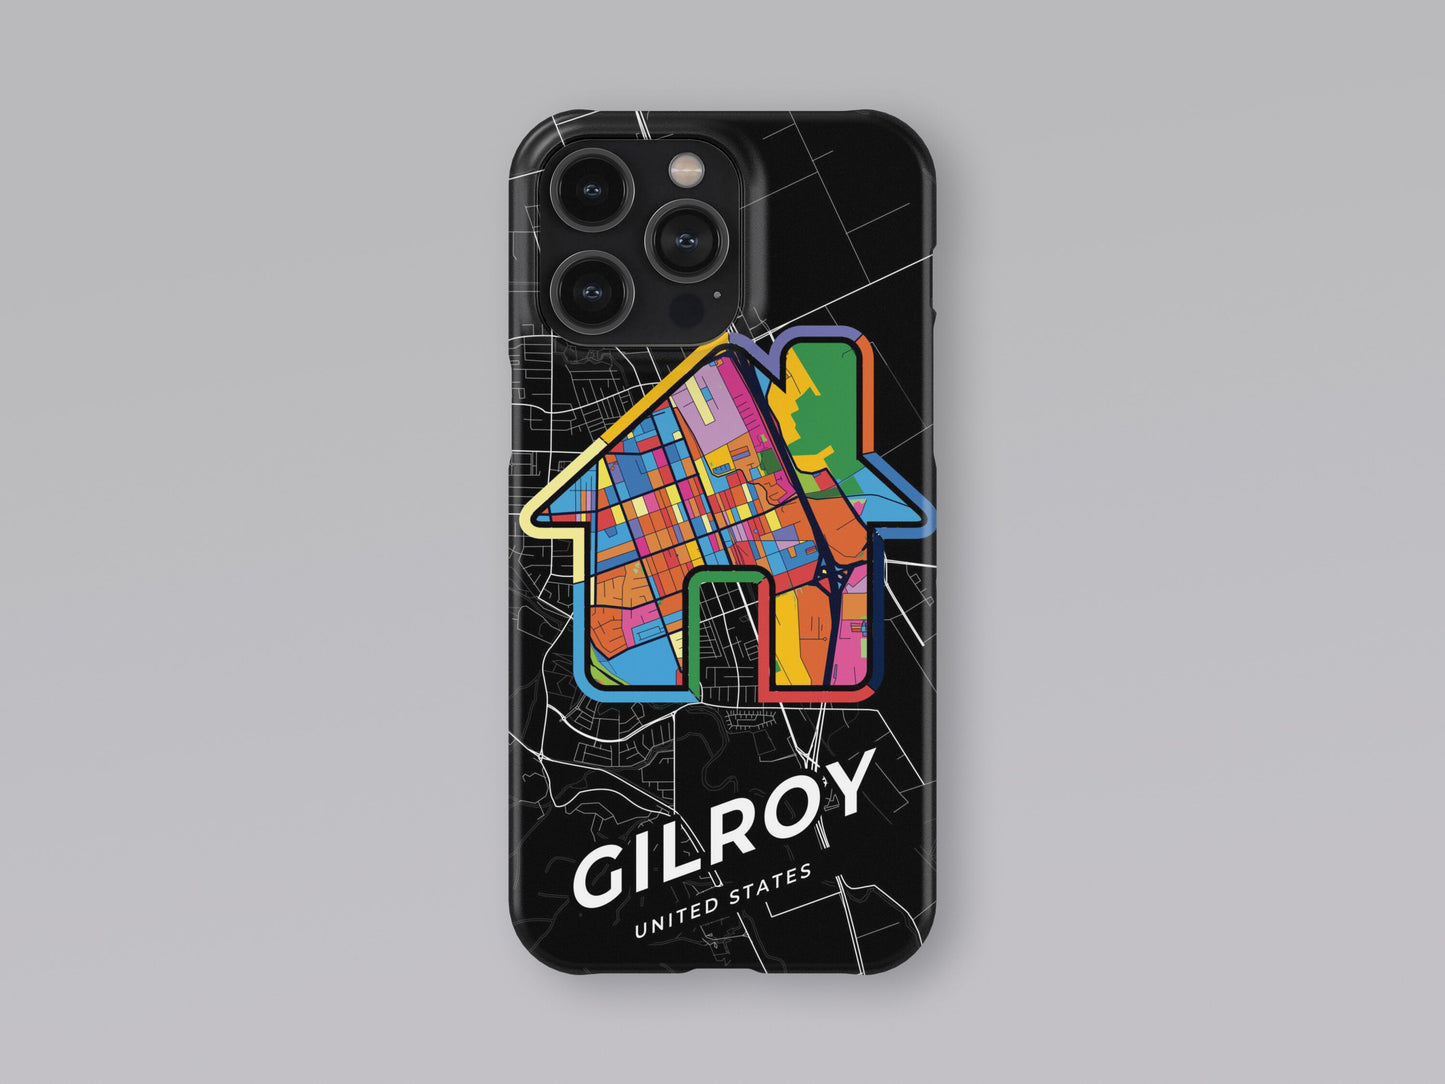 Gilroy California slim phone case with colorful icon. Birthday, wedding or housewarming gift. Couple match cases. 3